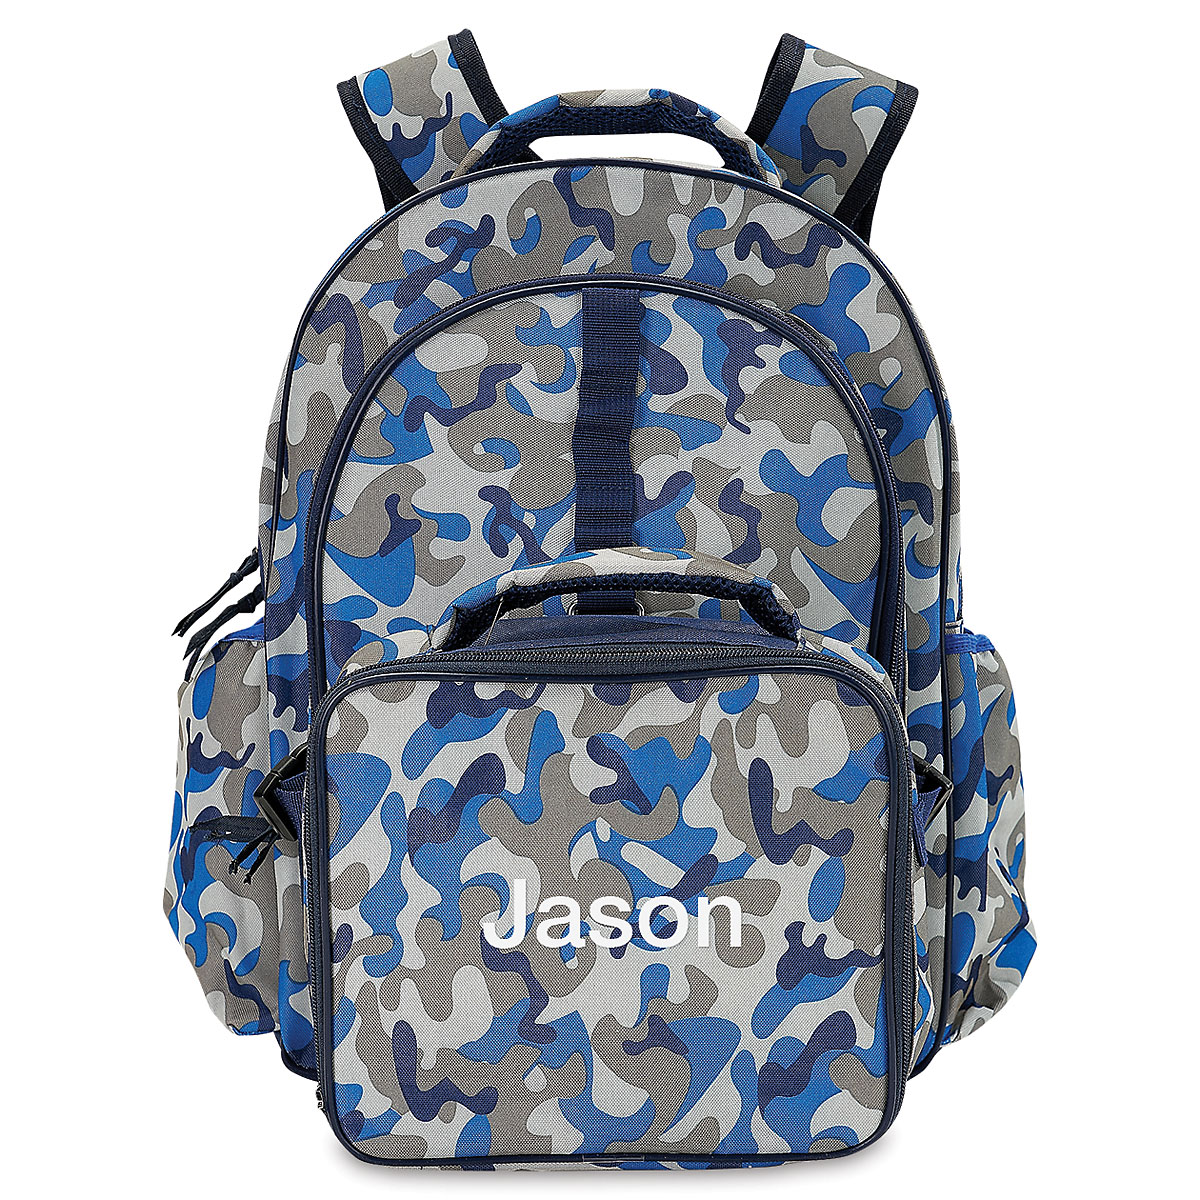 Camo Backpack and Lunchbox for Boys Back to School